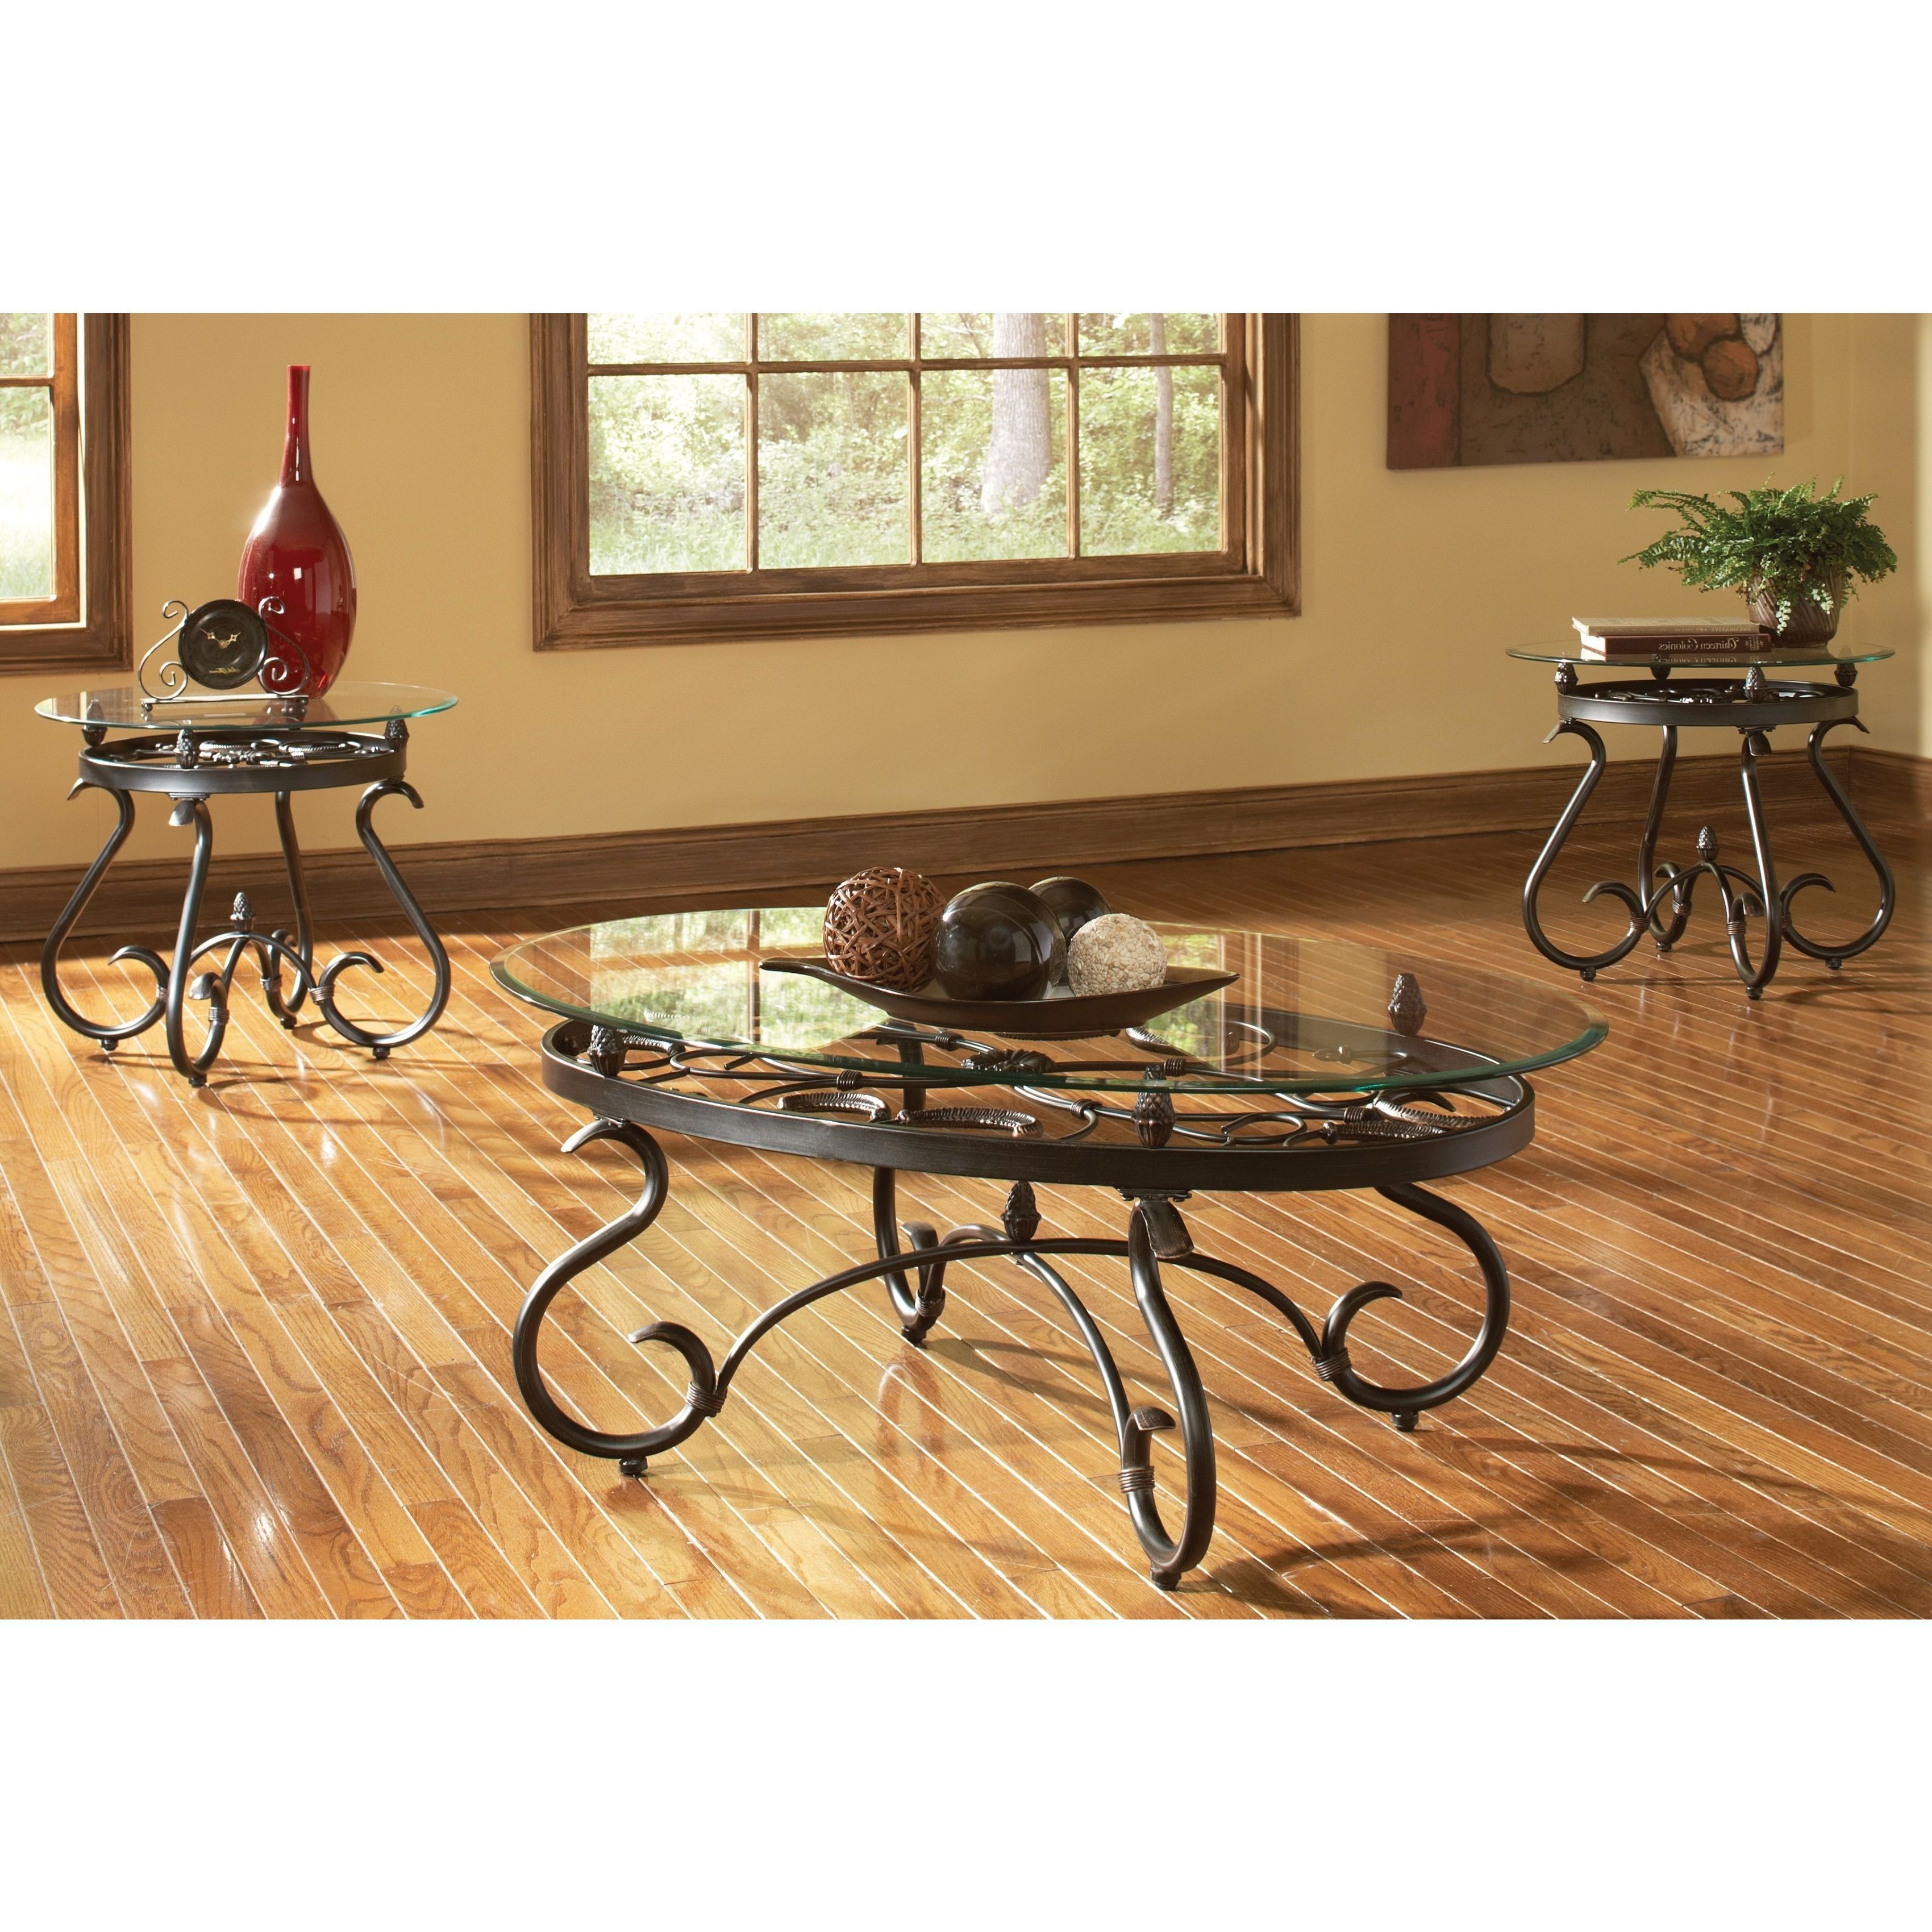 Best And Newest Gracewood Hollow Fishta Antique Brass Metal Glass 3 Piece Tables Throughout Gracewood Hollow Fishta Antique Brass Metal/ Glass 3 Piece (View 1 of 20)